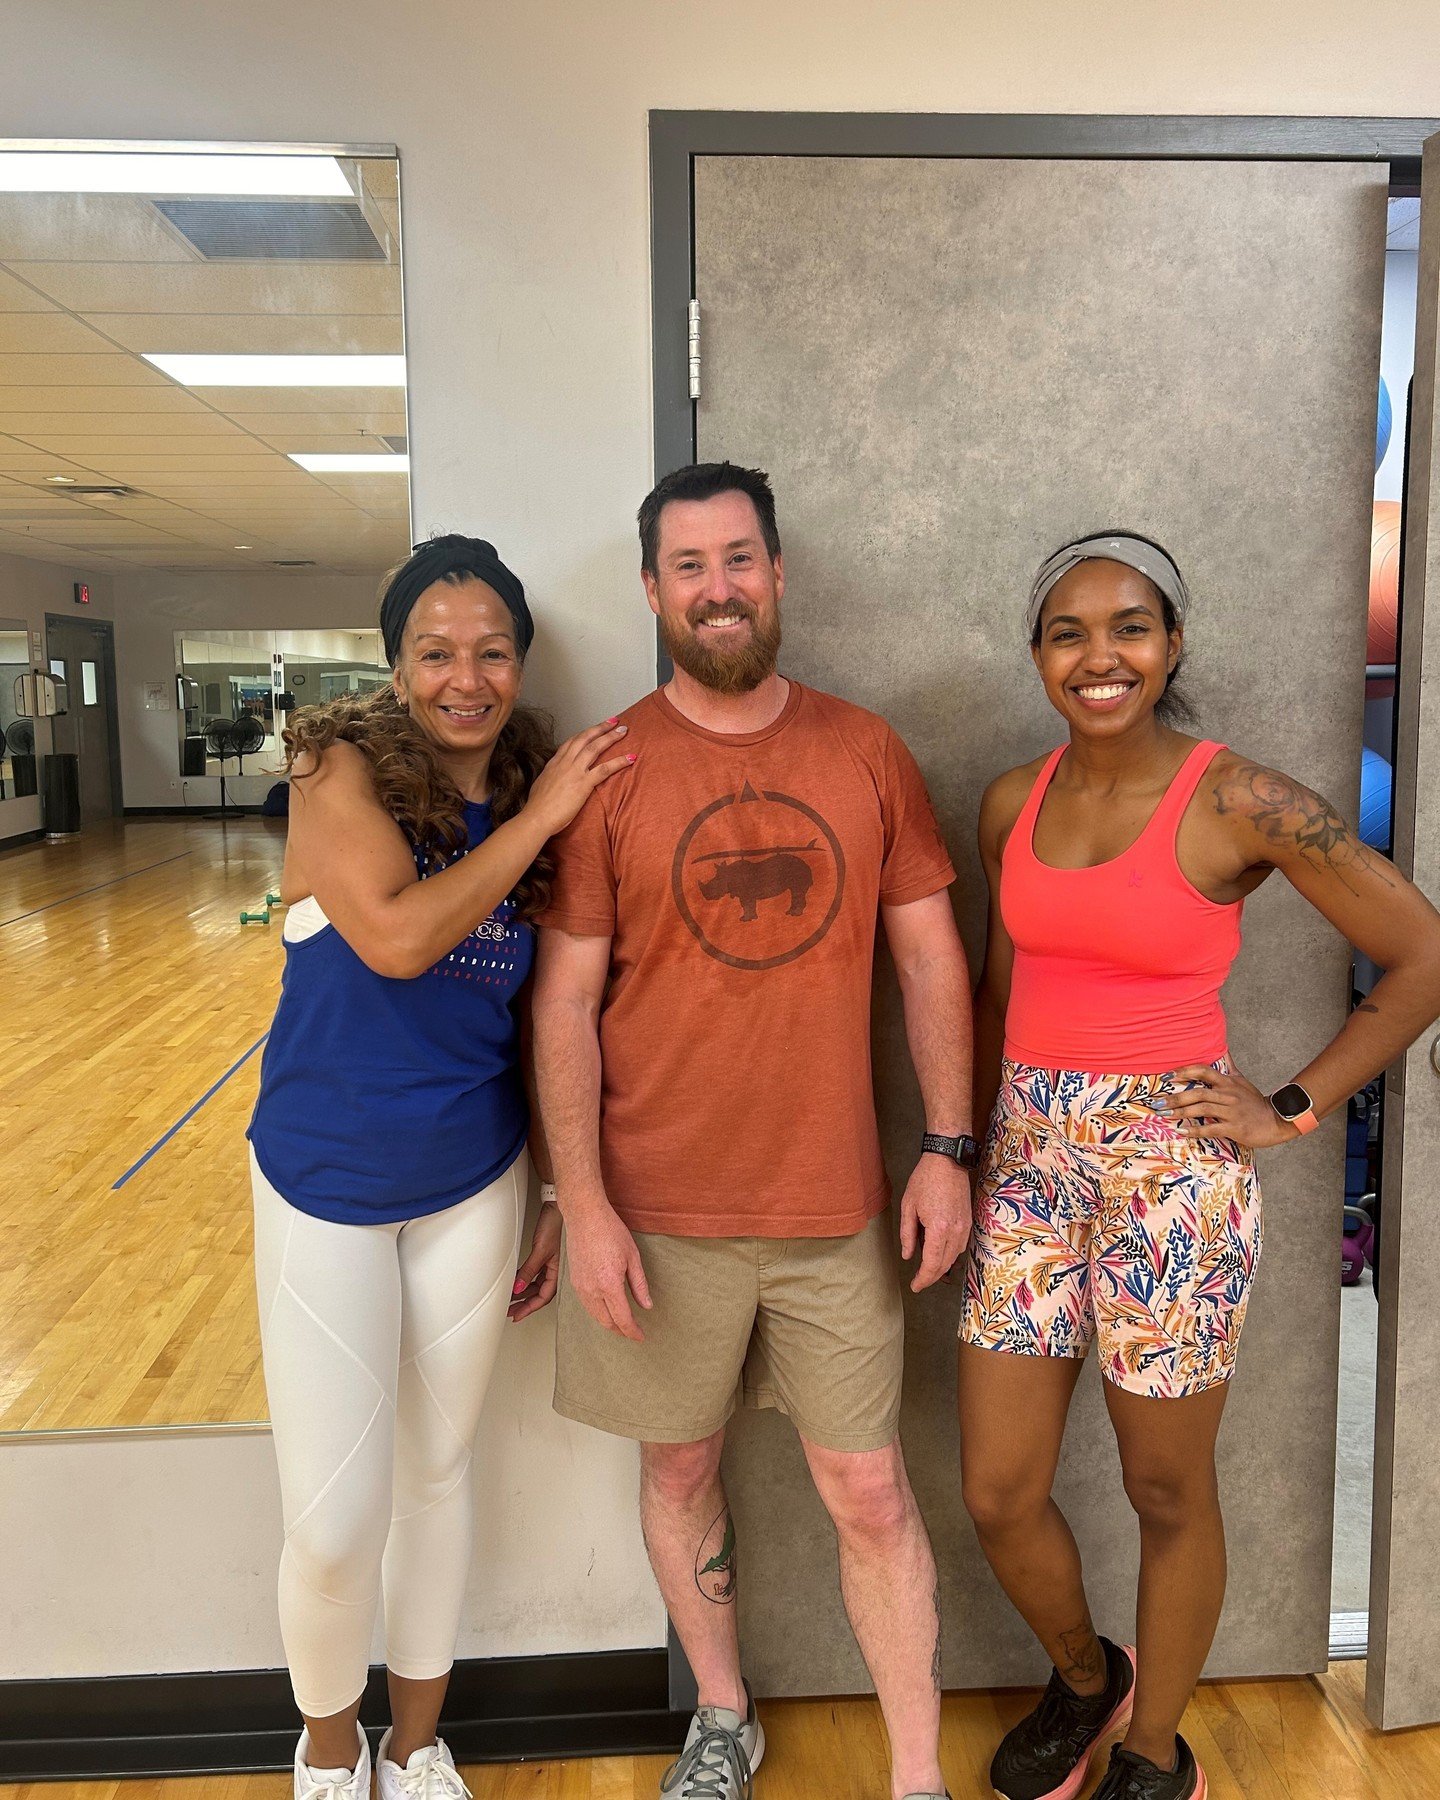 Congratulations to our Push-Up Challenge winners: Melanie, Ed, and Arianna! 🏅

Ed crushed 2403 regular-style (40-44y), Melanie nailed 722 regular-style (50-54y), and Arianna powered through 801 modified (20-25y) pushups throughout the month of April